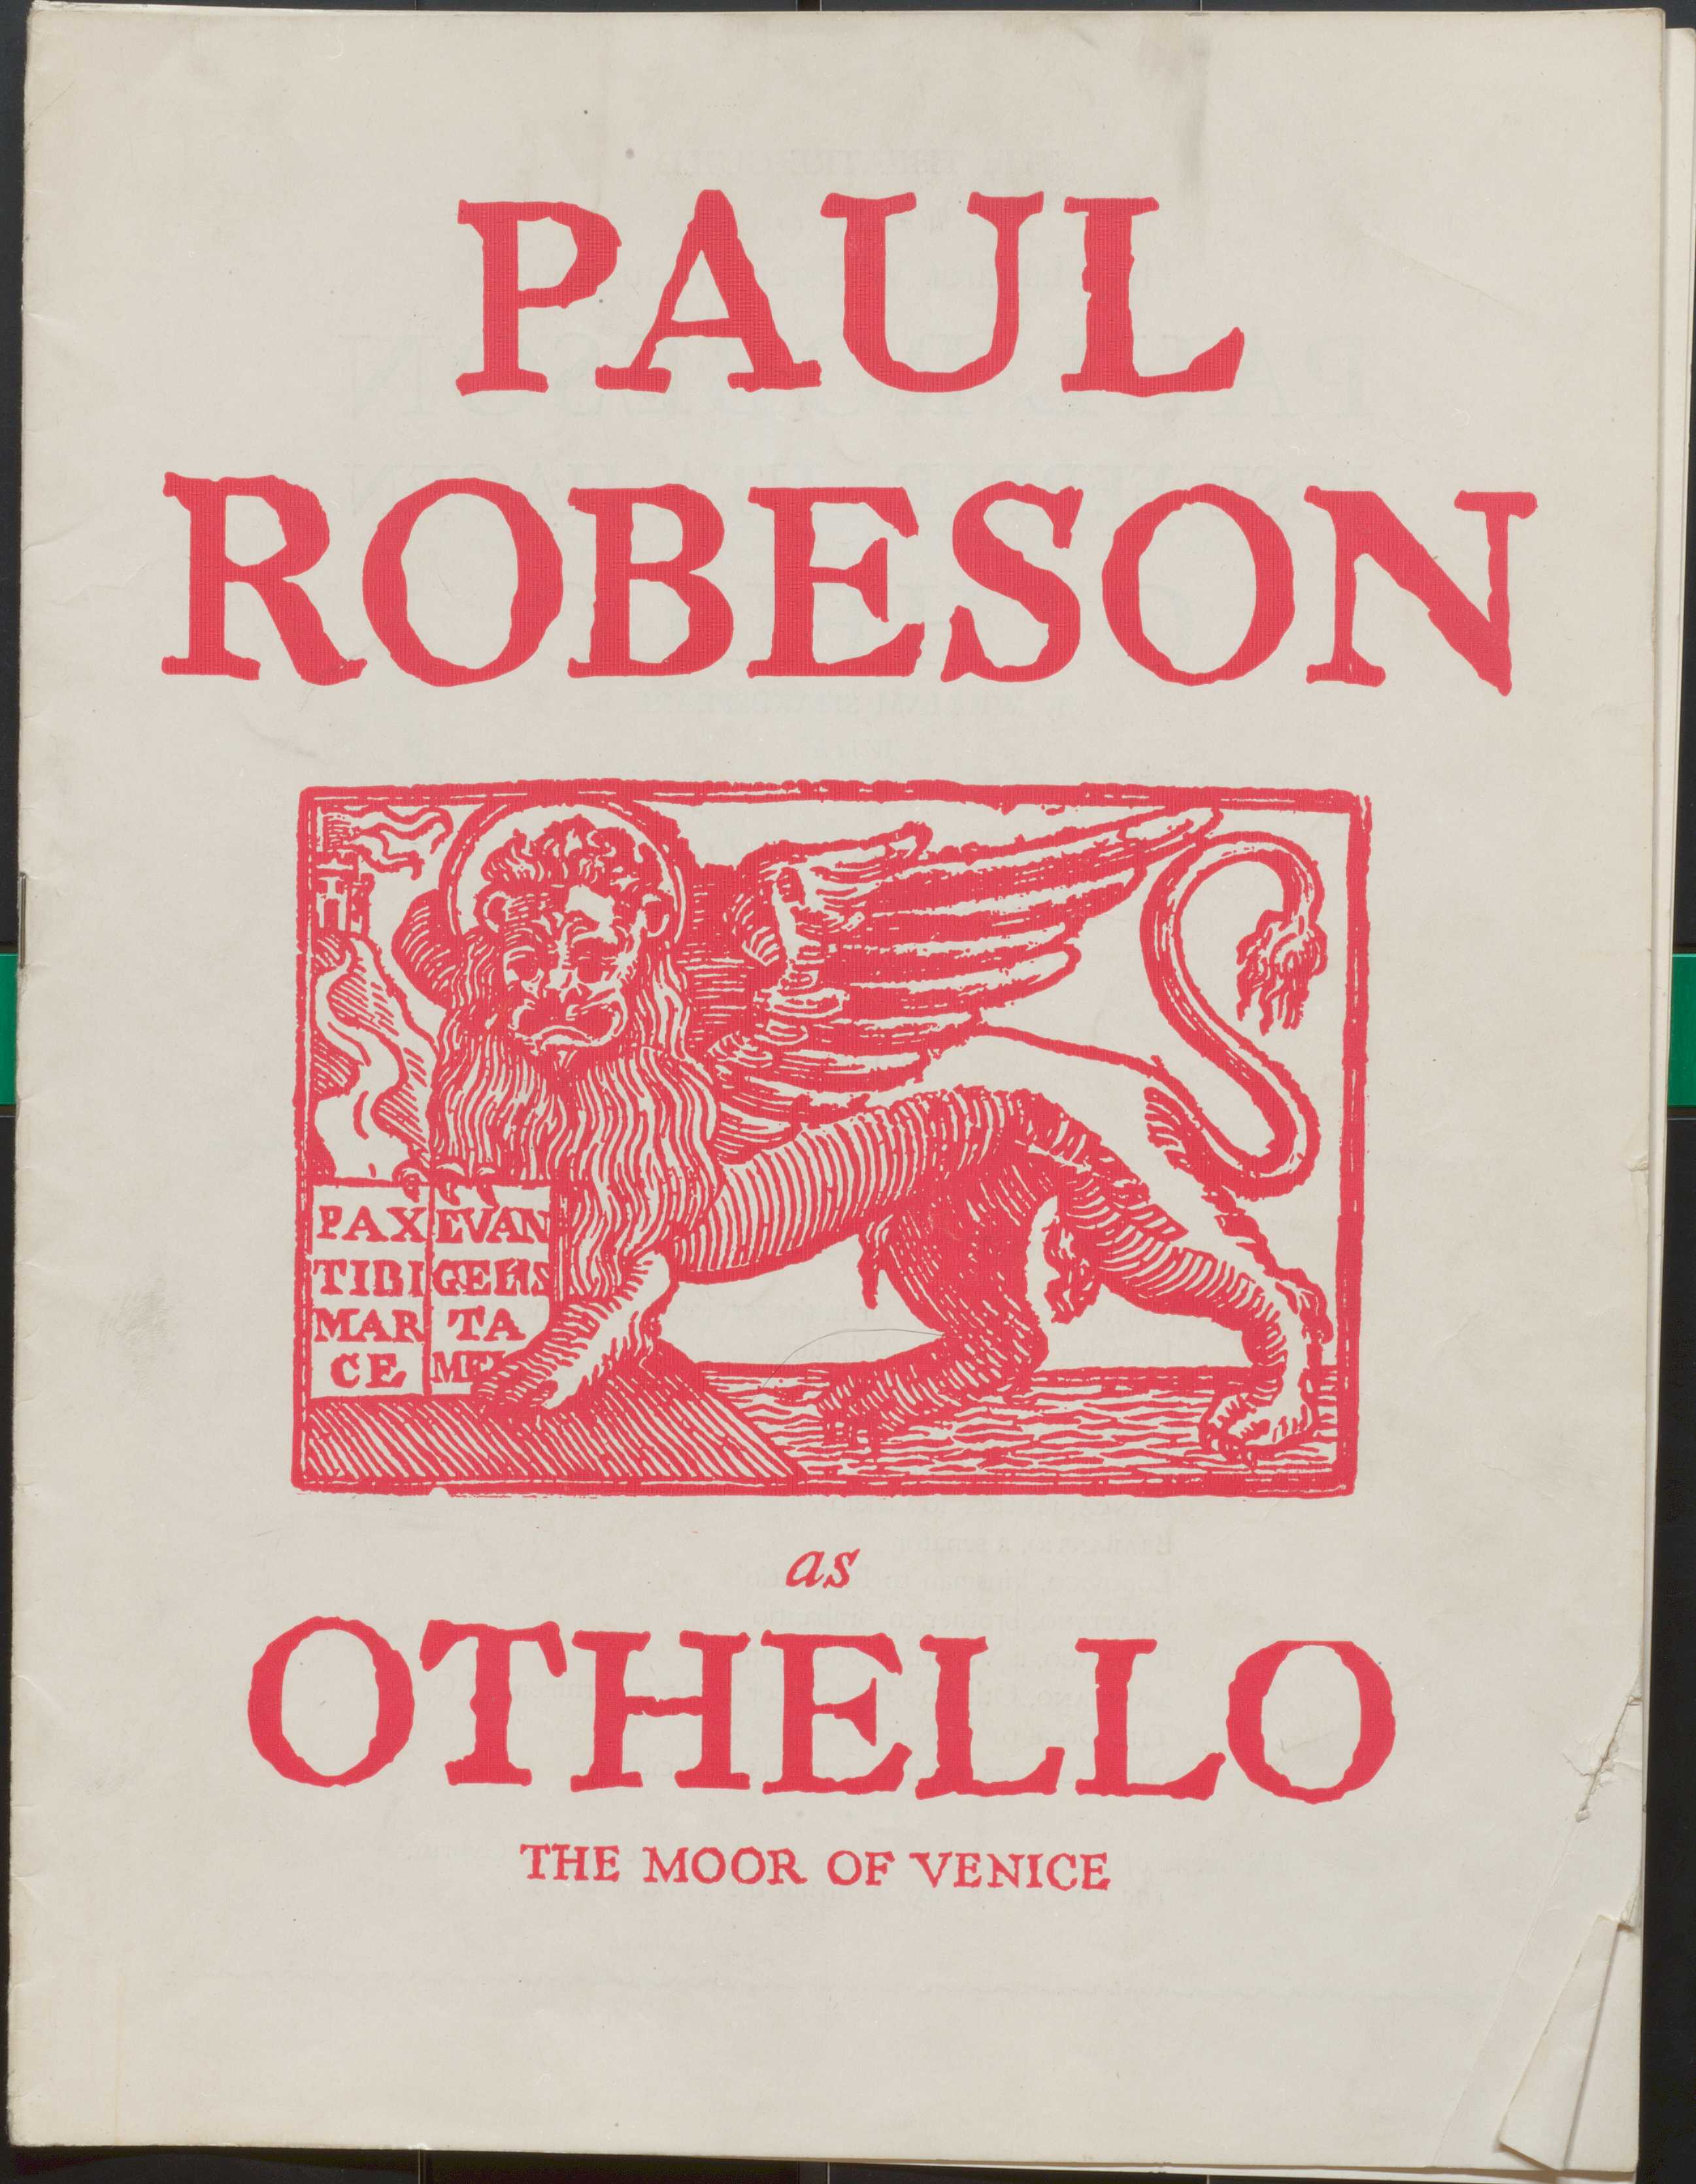 Cover of Othello Playbill